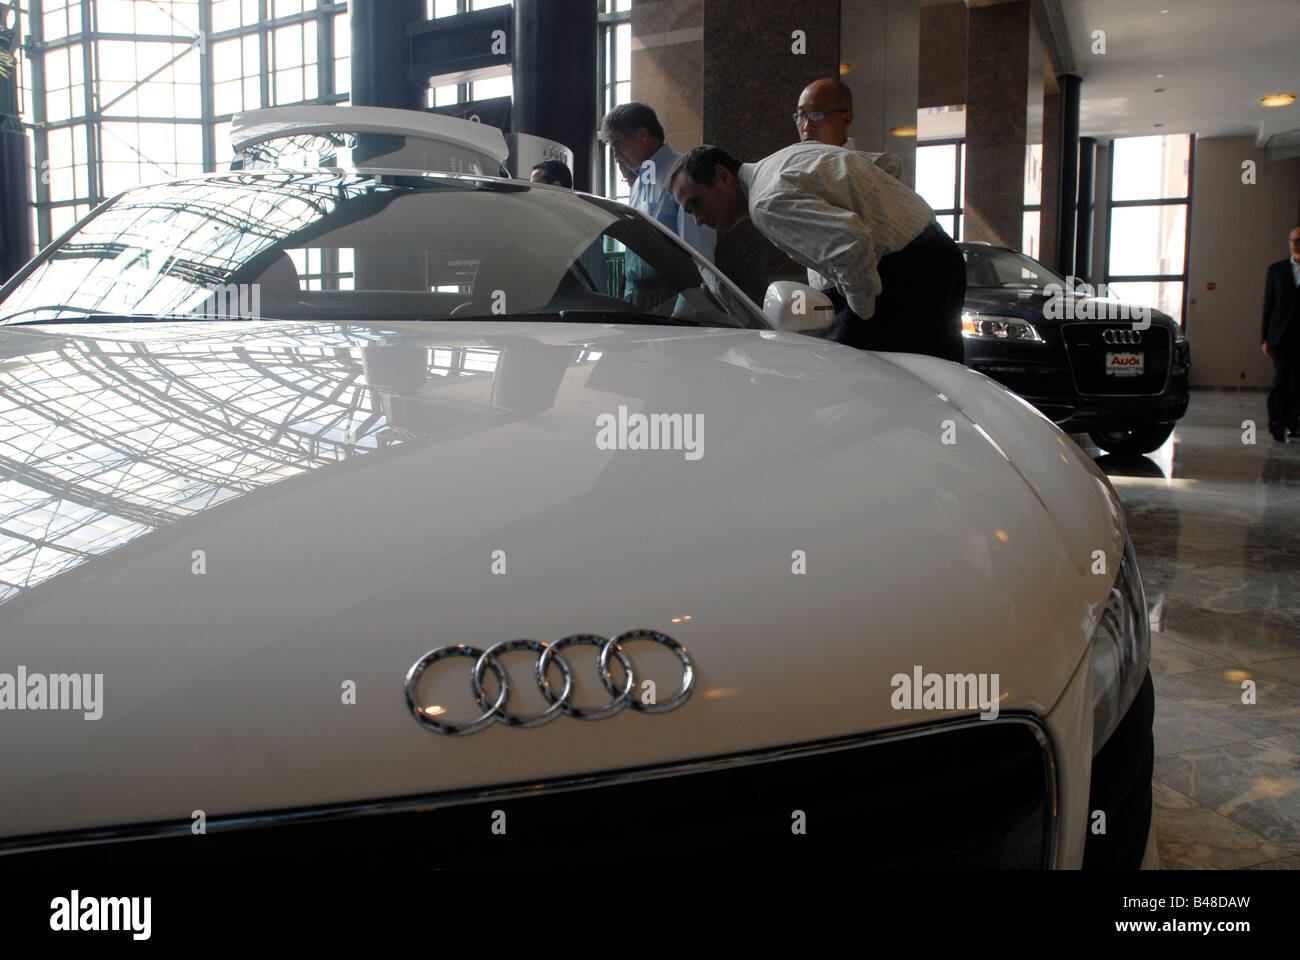 Visitors examine an Audi luxury vehicle on display at the World Financial Center New York Motorexpo Stock Photo